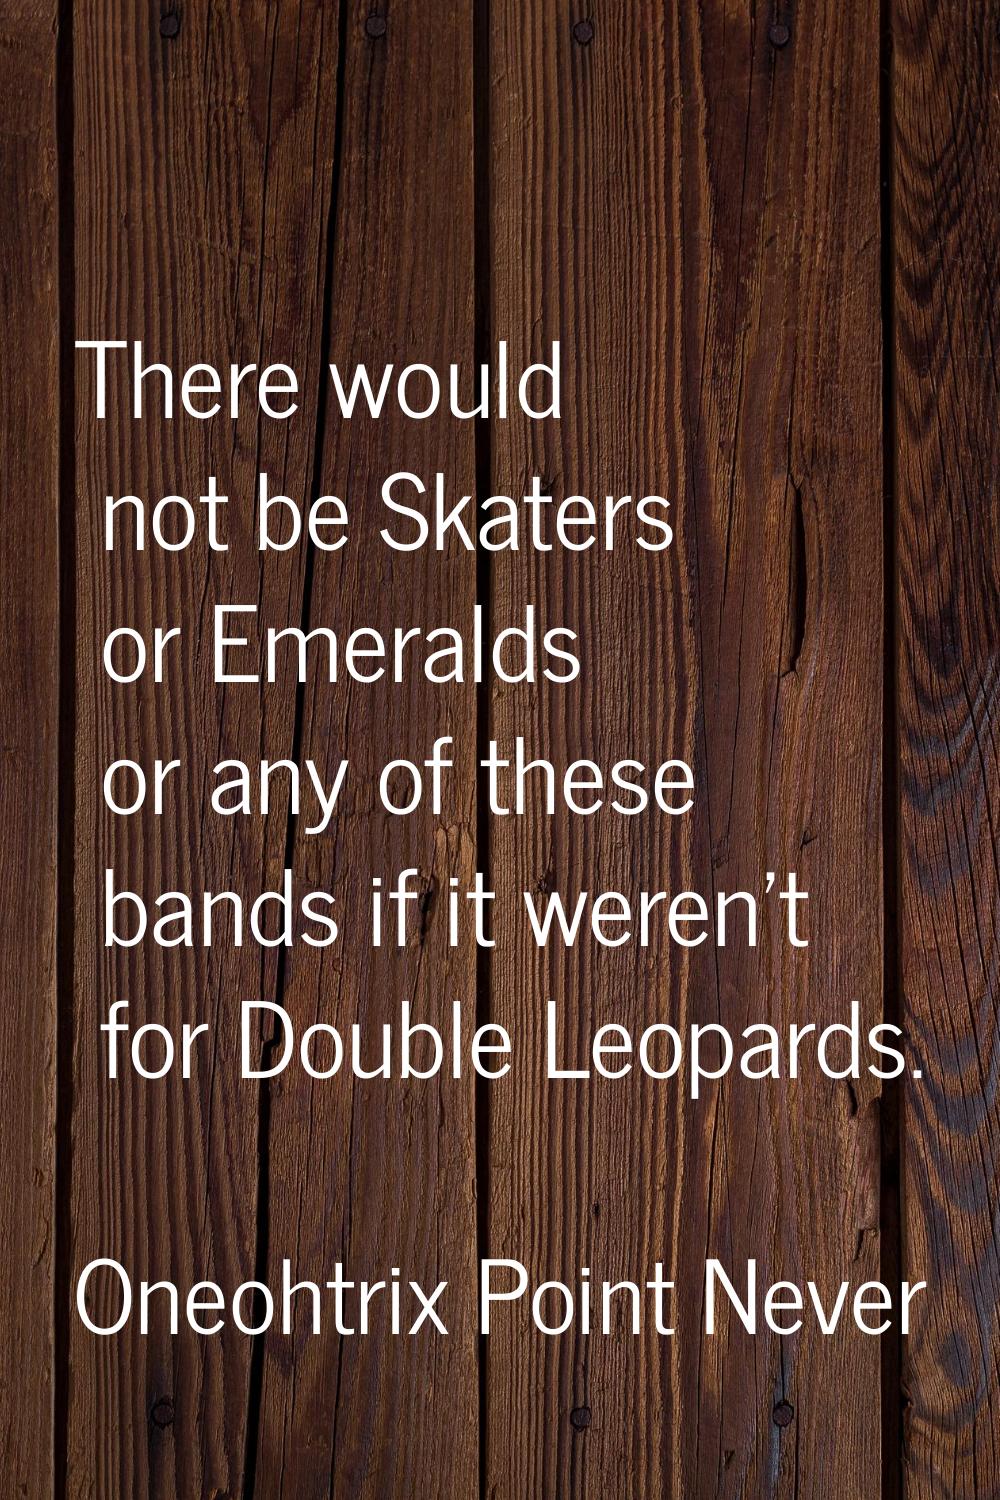 There would not be Skaters or Emeralds or any of these bands if it weren't for Double Leopards.